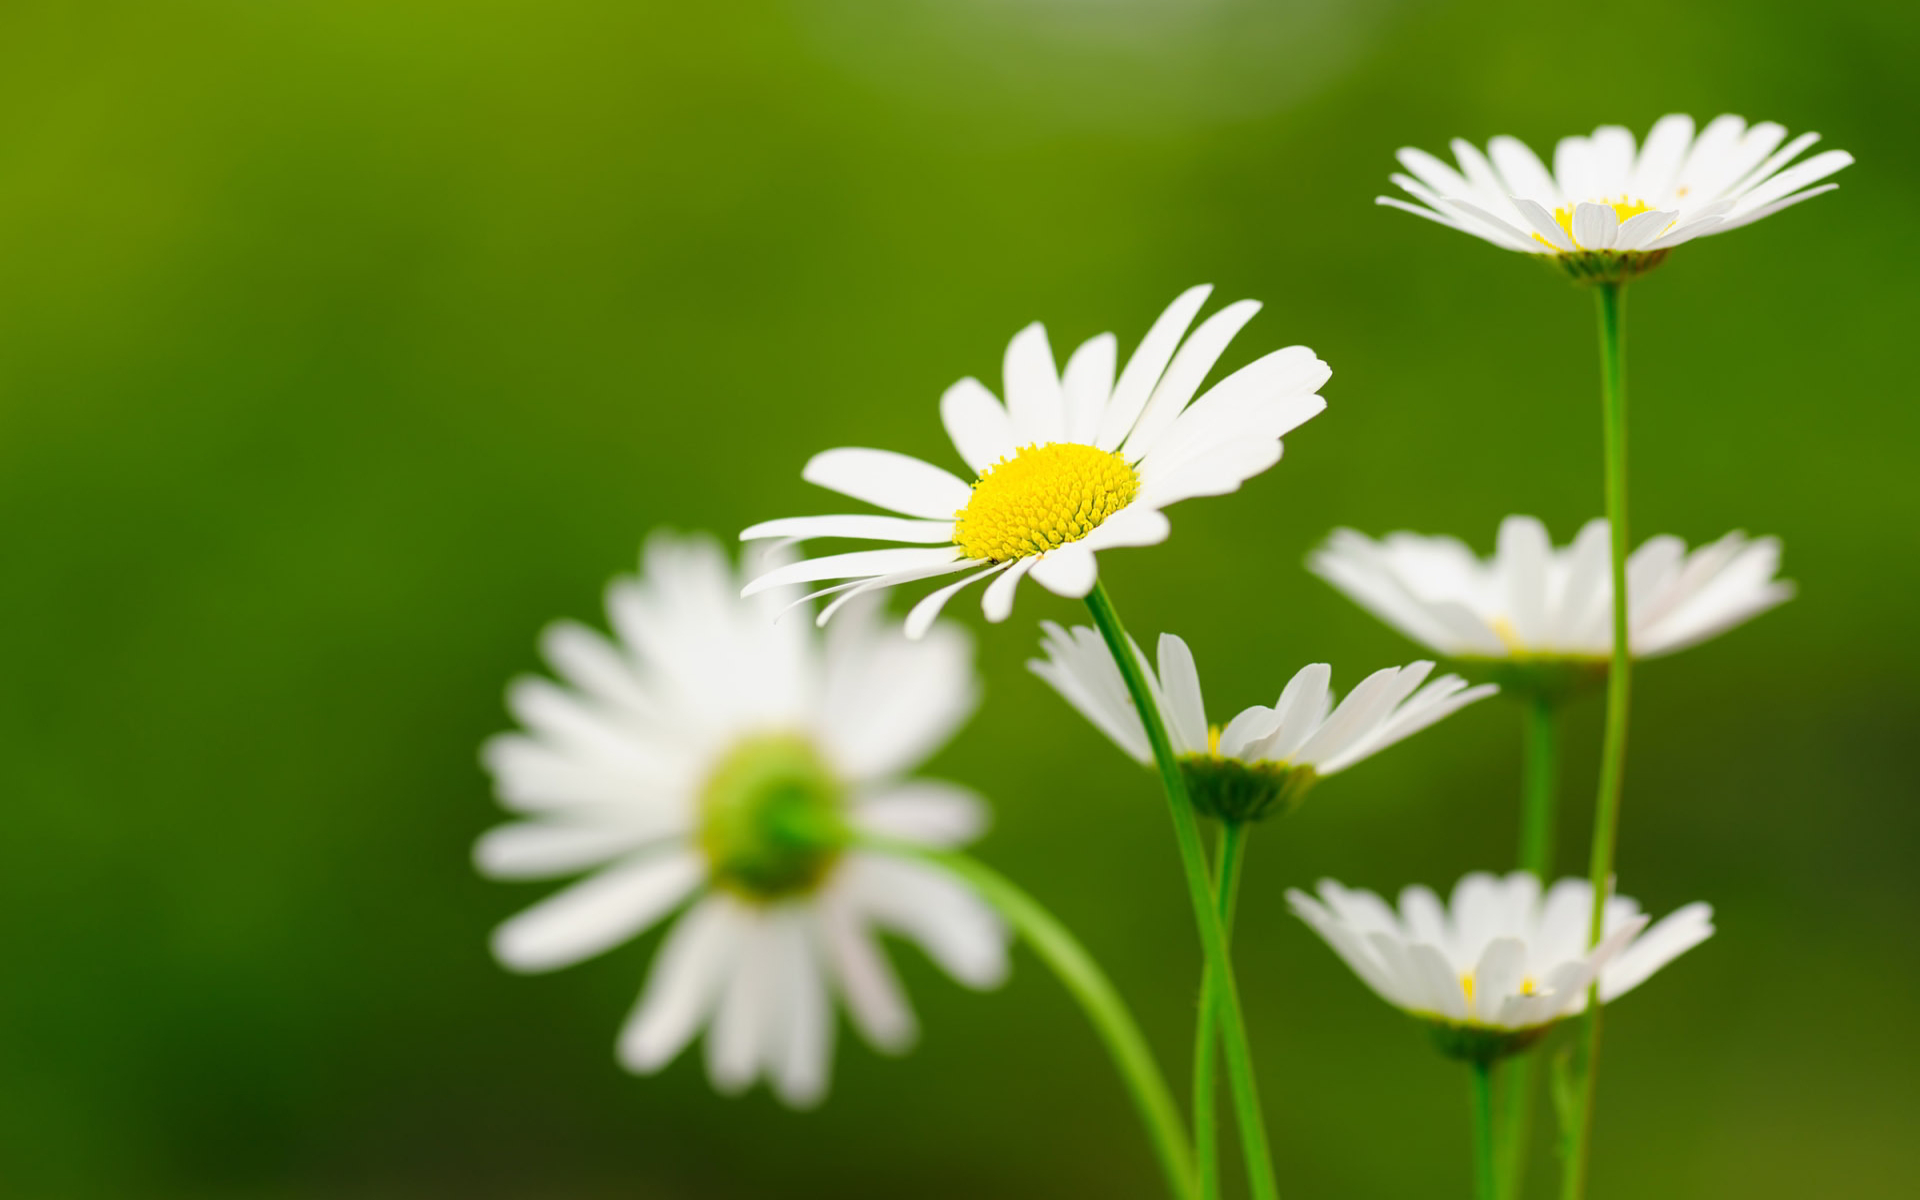 Daisy Flower Wallpaper HD Pictures One